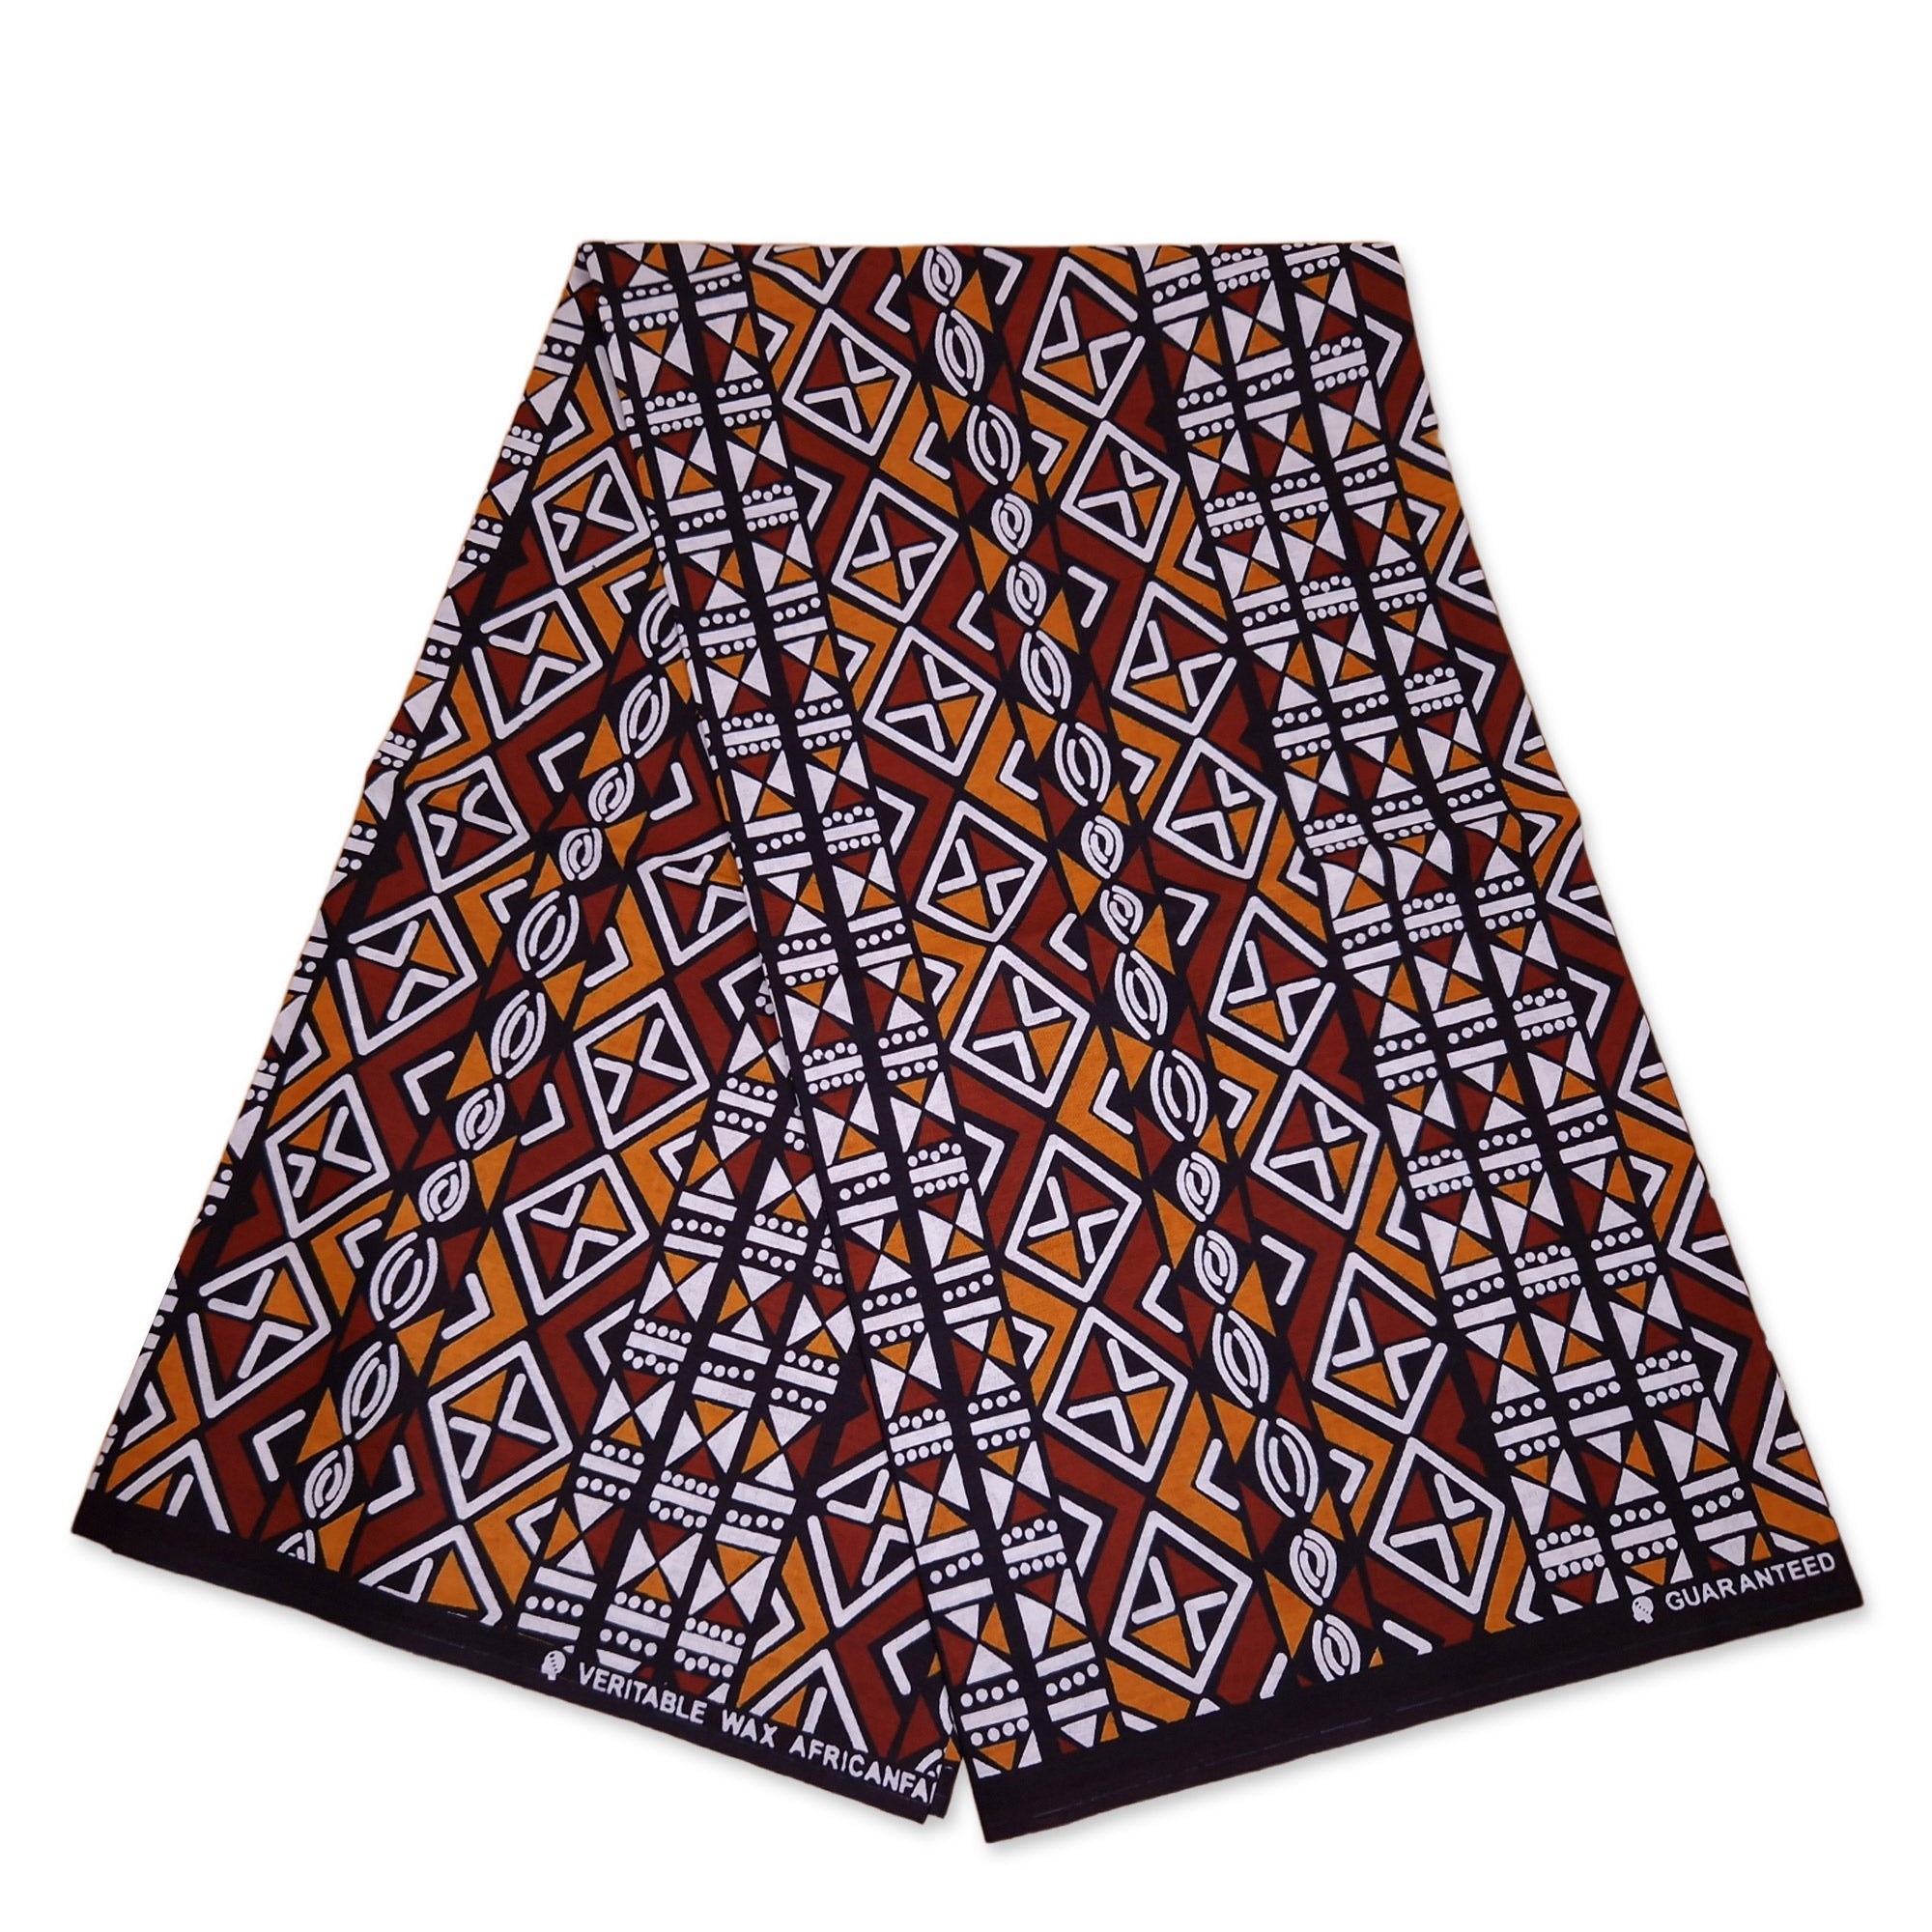 African print fabric - Multicolor leaves - Polycotton